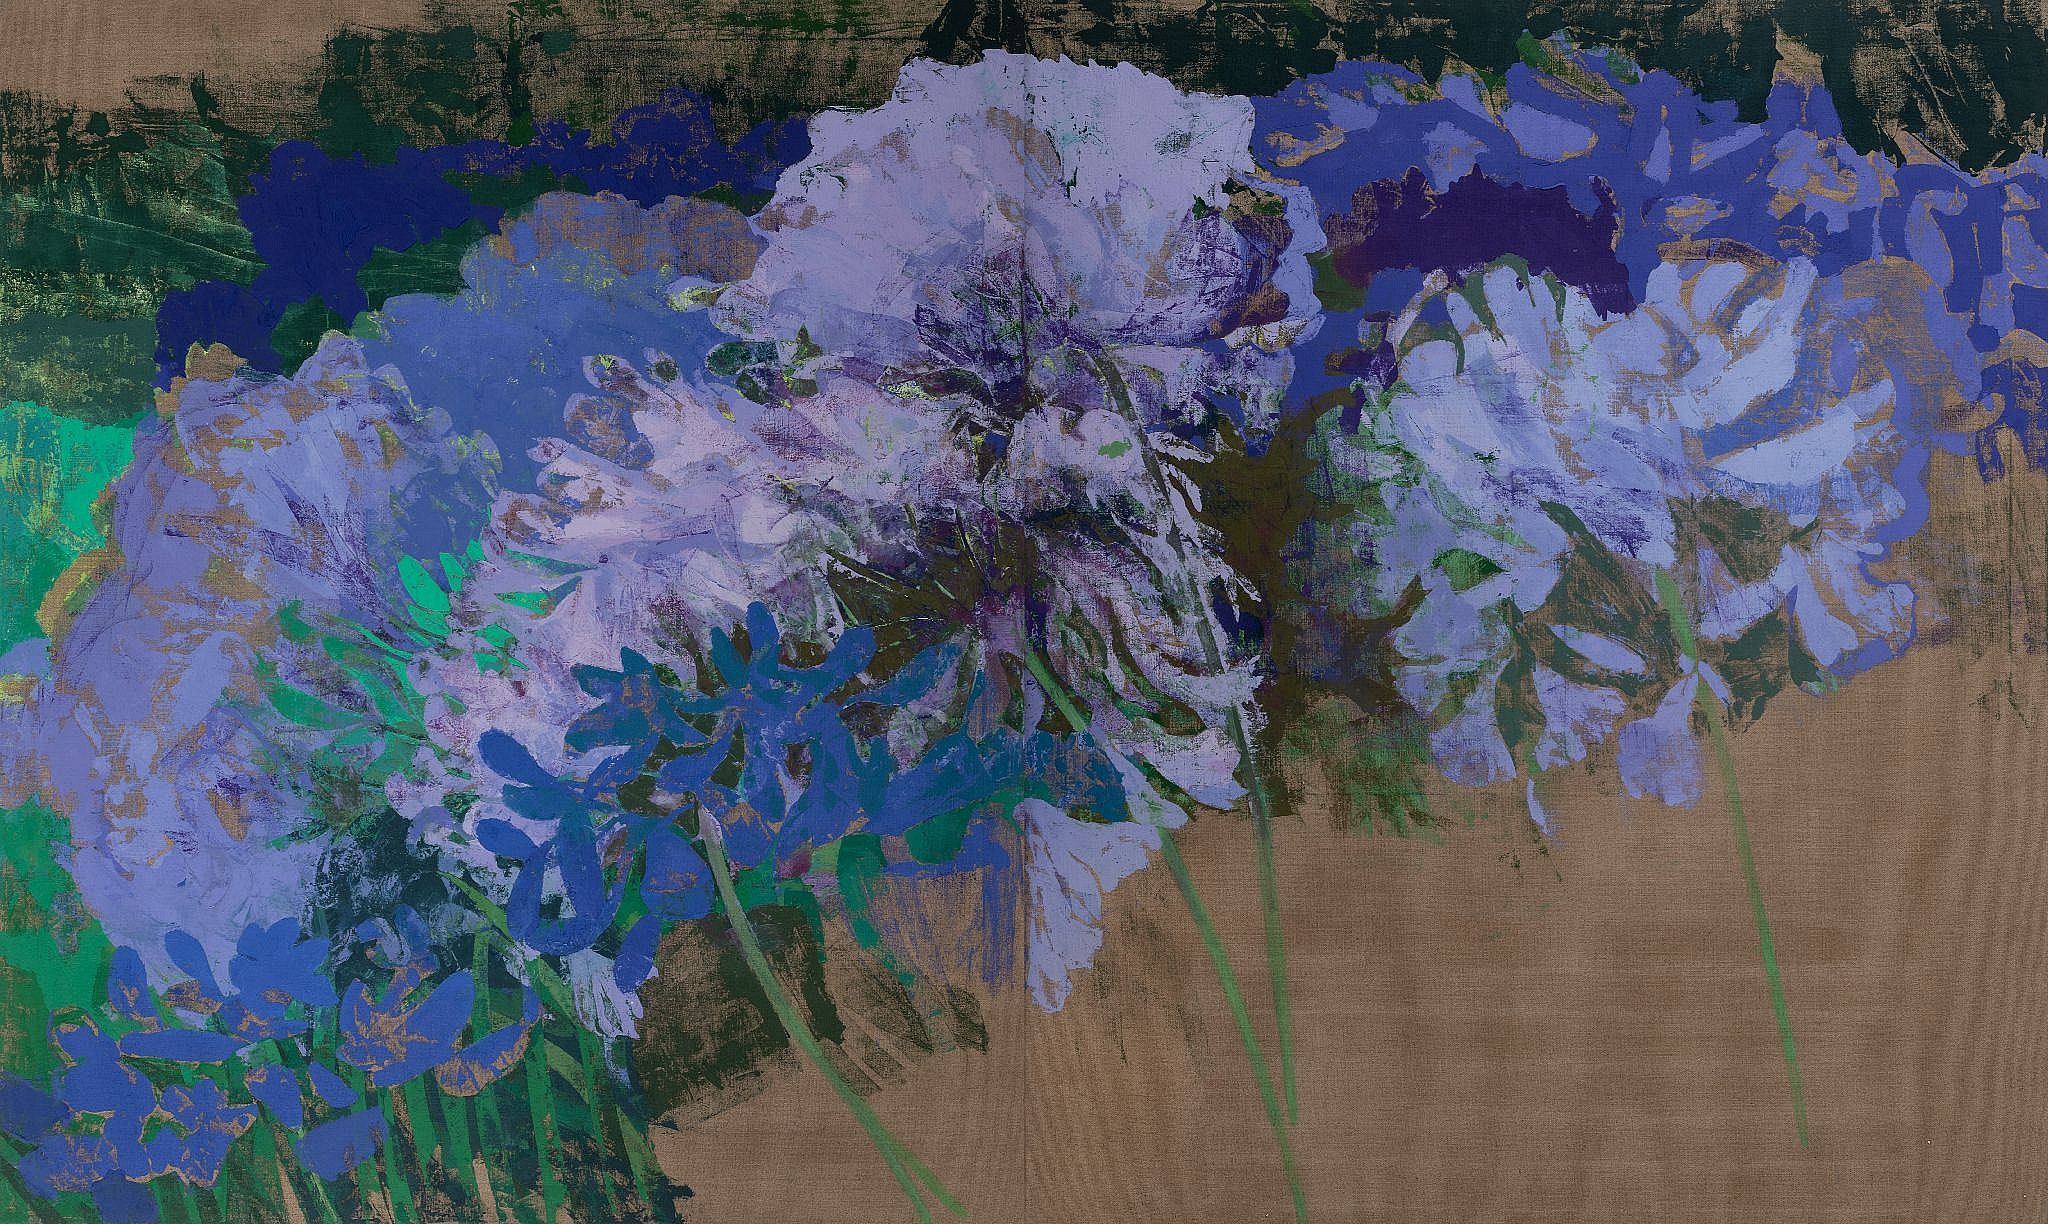 "Eric Dever: To Look at Things in Bloom" Featured as a Must See on Artforum Artguide